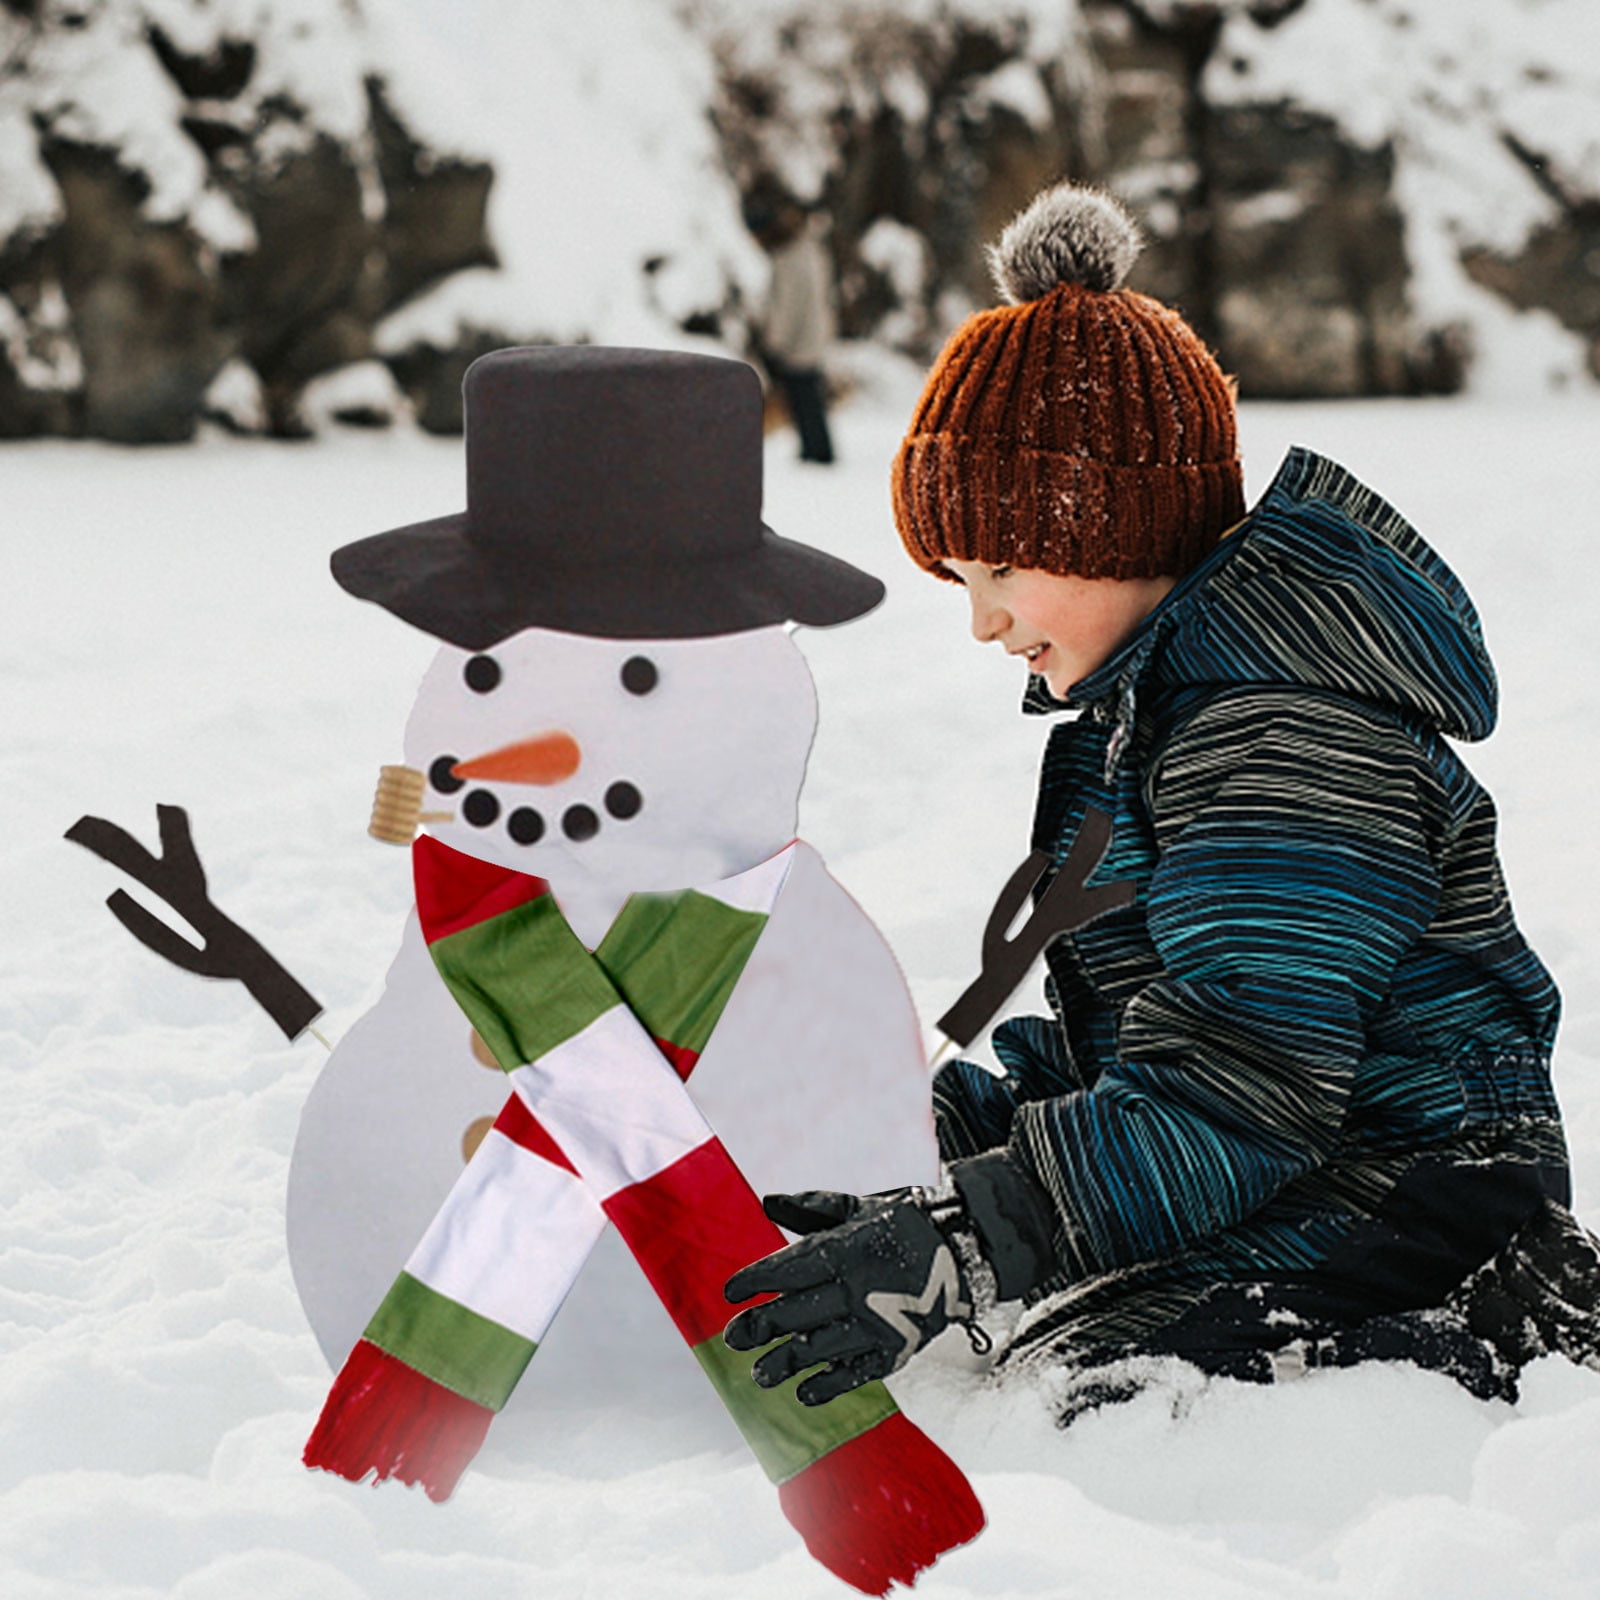 15 PC All-in-One Build A Snowman Set